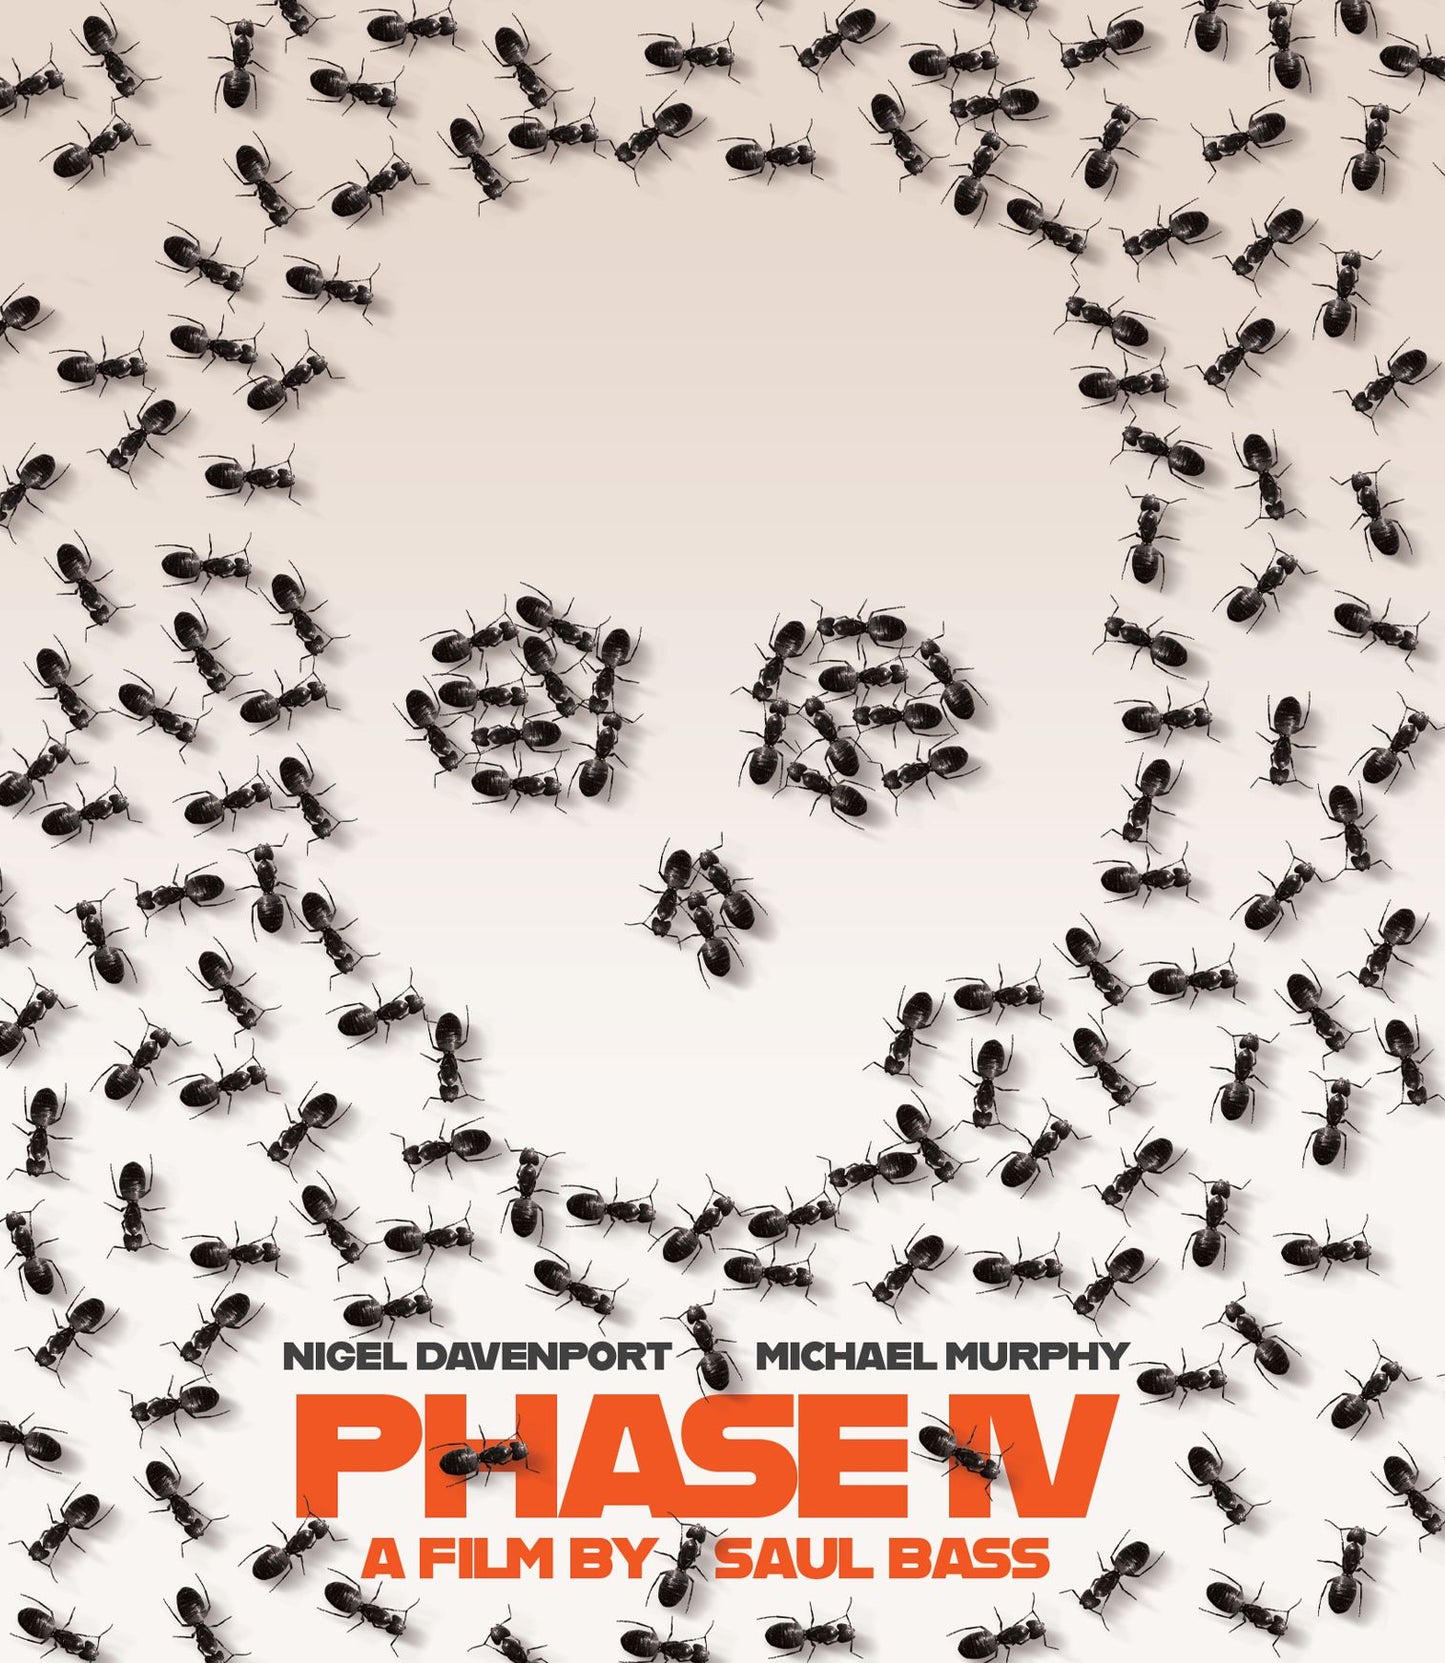 Phase IV Limited Edition Vinegar Syndrome 4K UHD/Blu-Ray [PRE-ORDER] [SLIPCOVER]